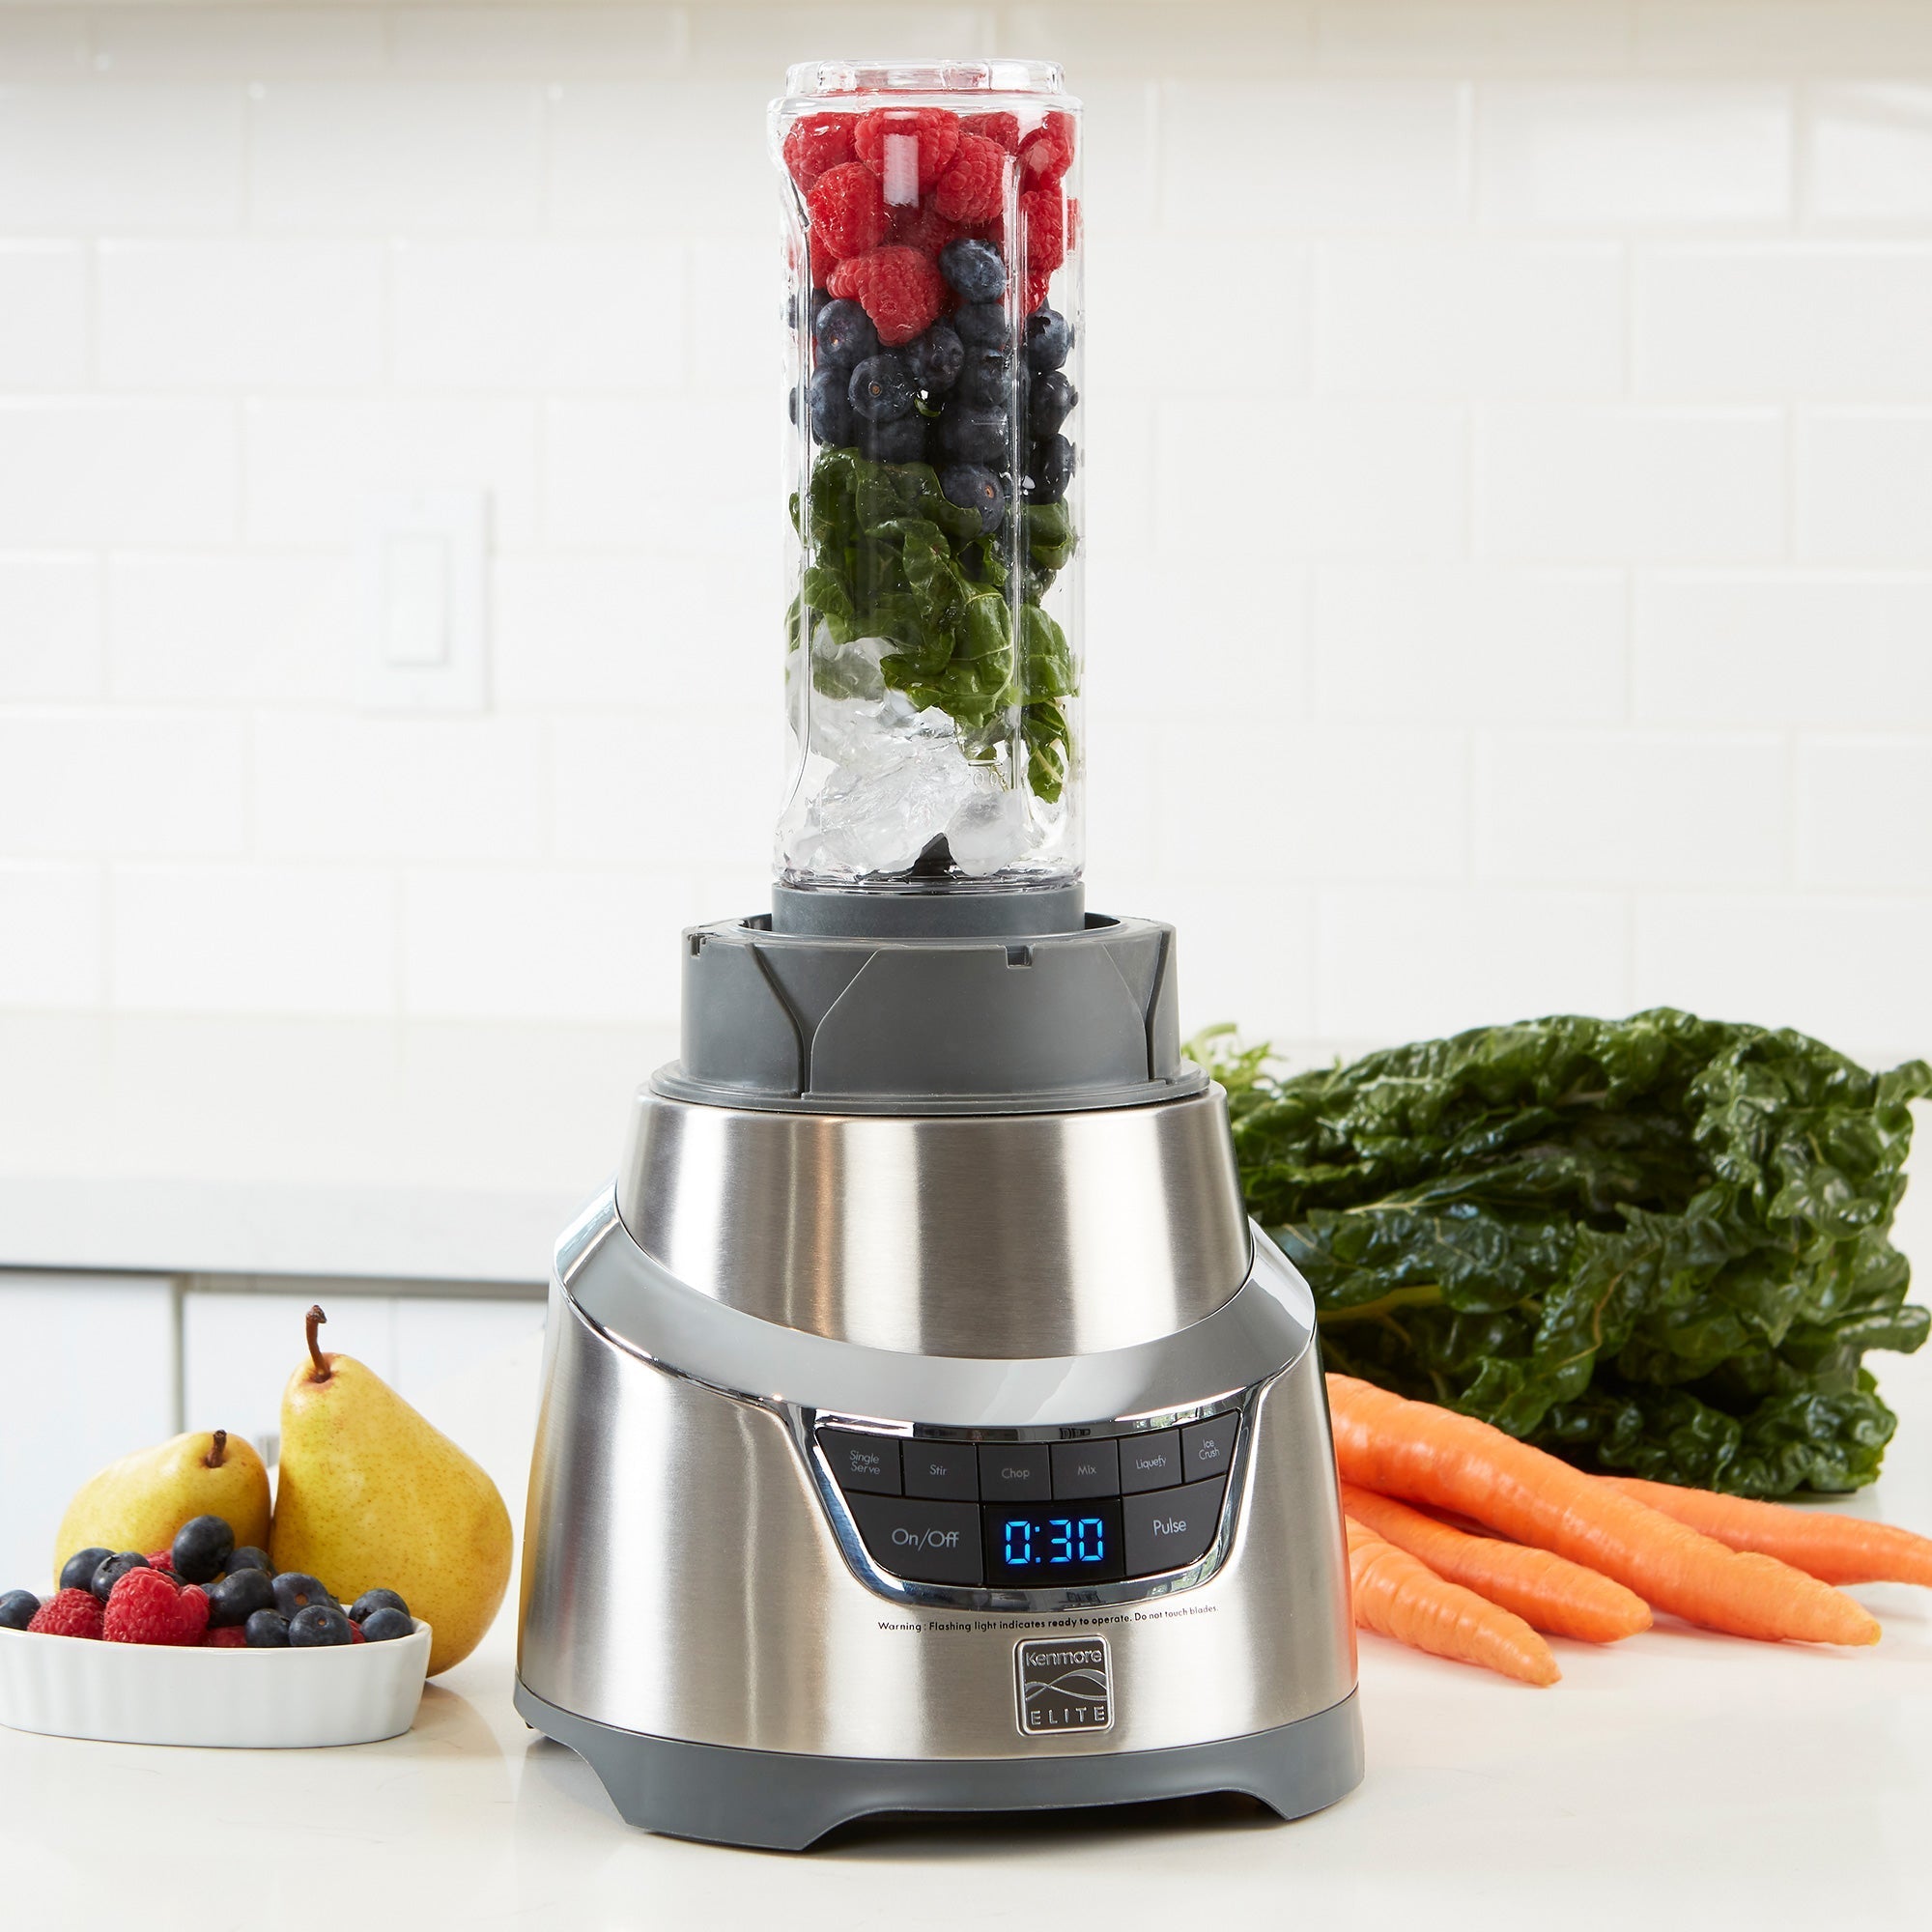 Lifestyle image of 1.3 horsepower blender on white counter with layers of ice and berries ready to blend in the single-serving cup and fruits and vegetables beside